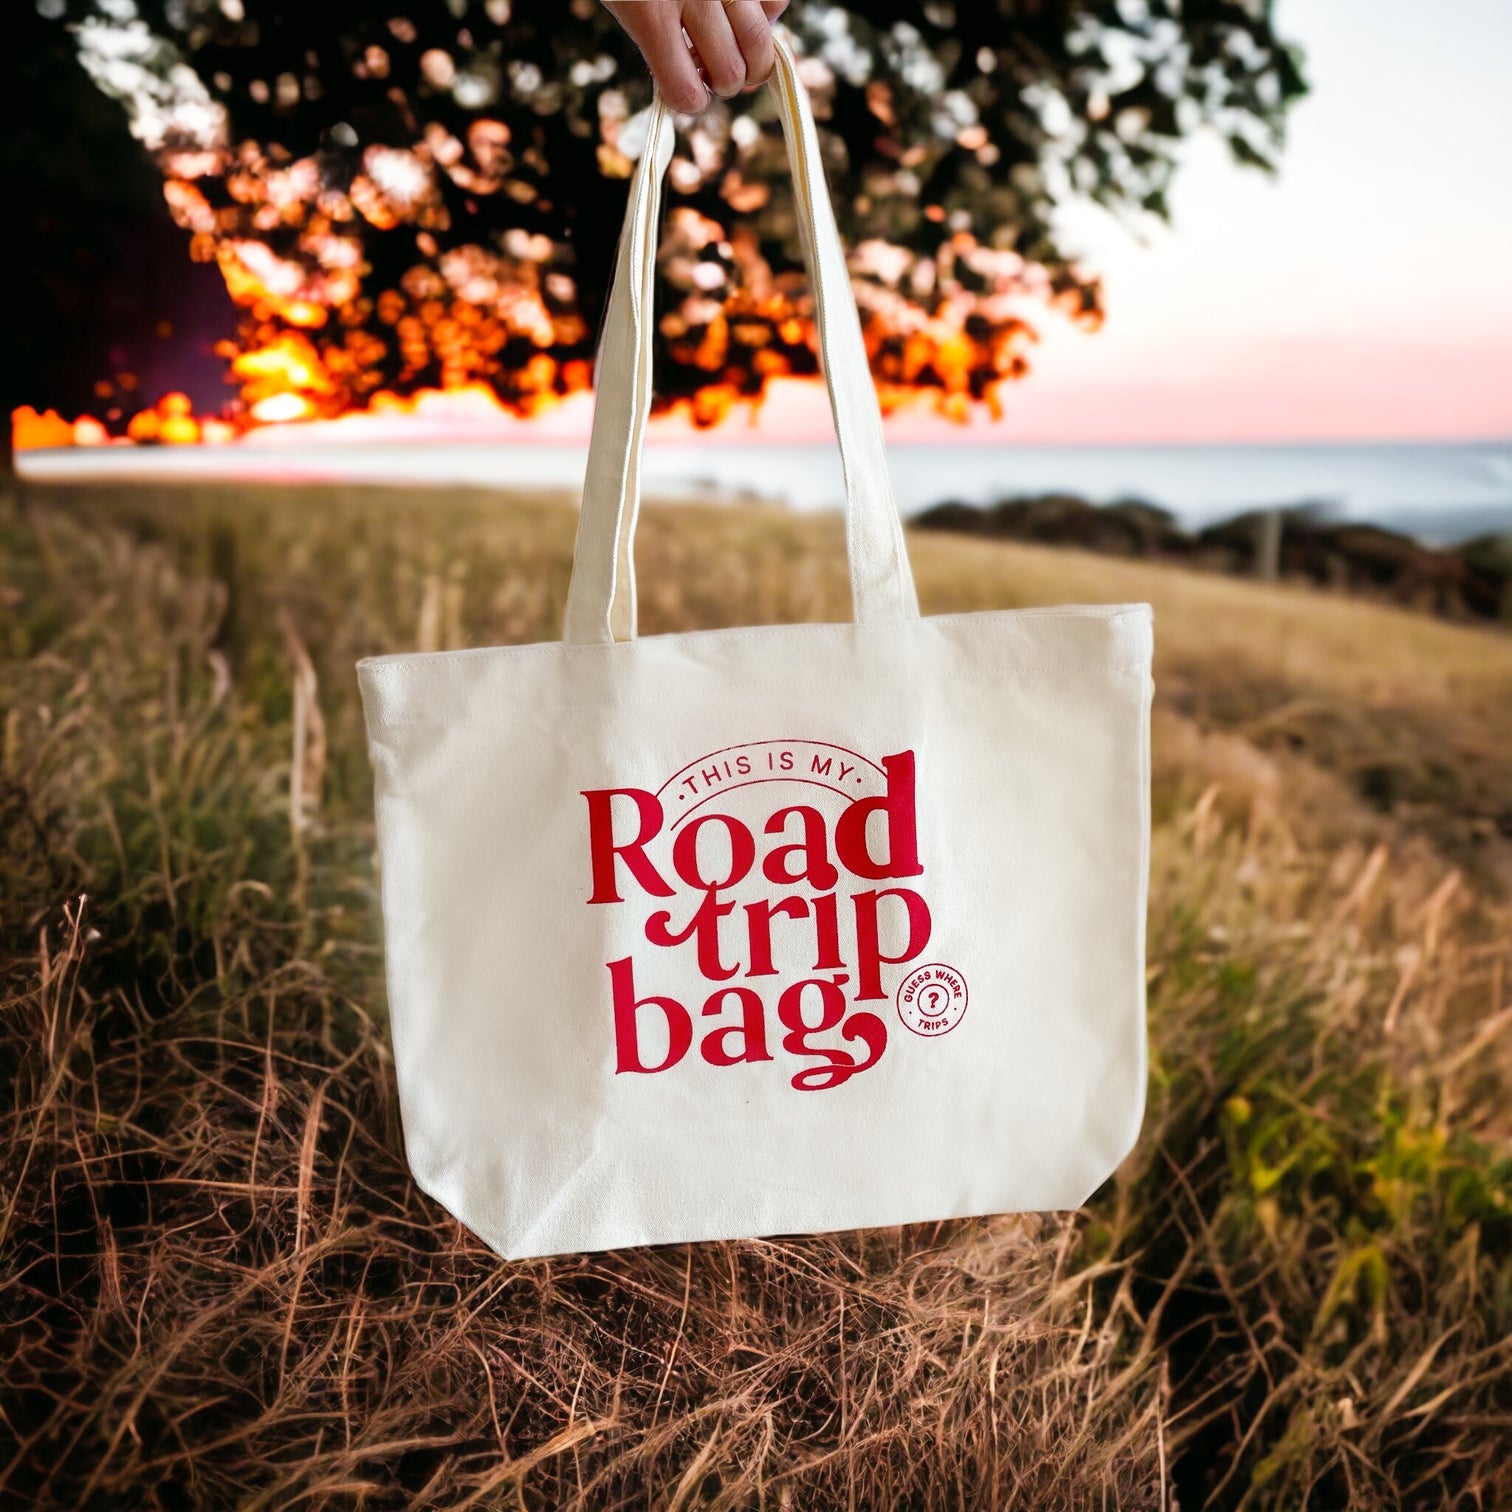 Tote bag with red writing